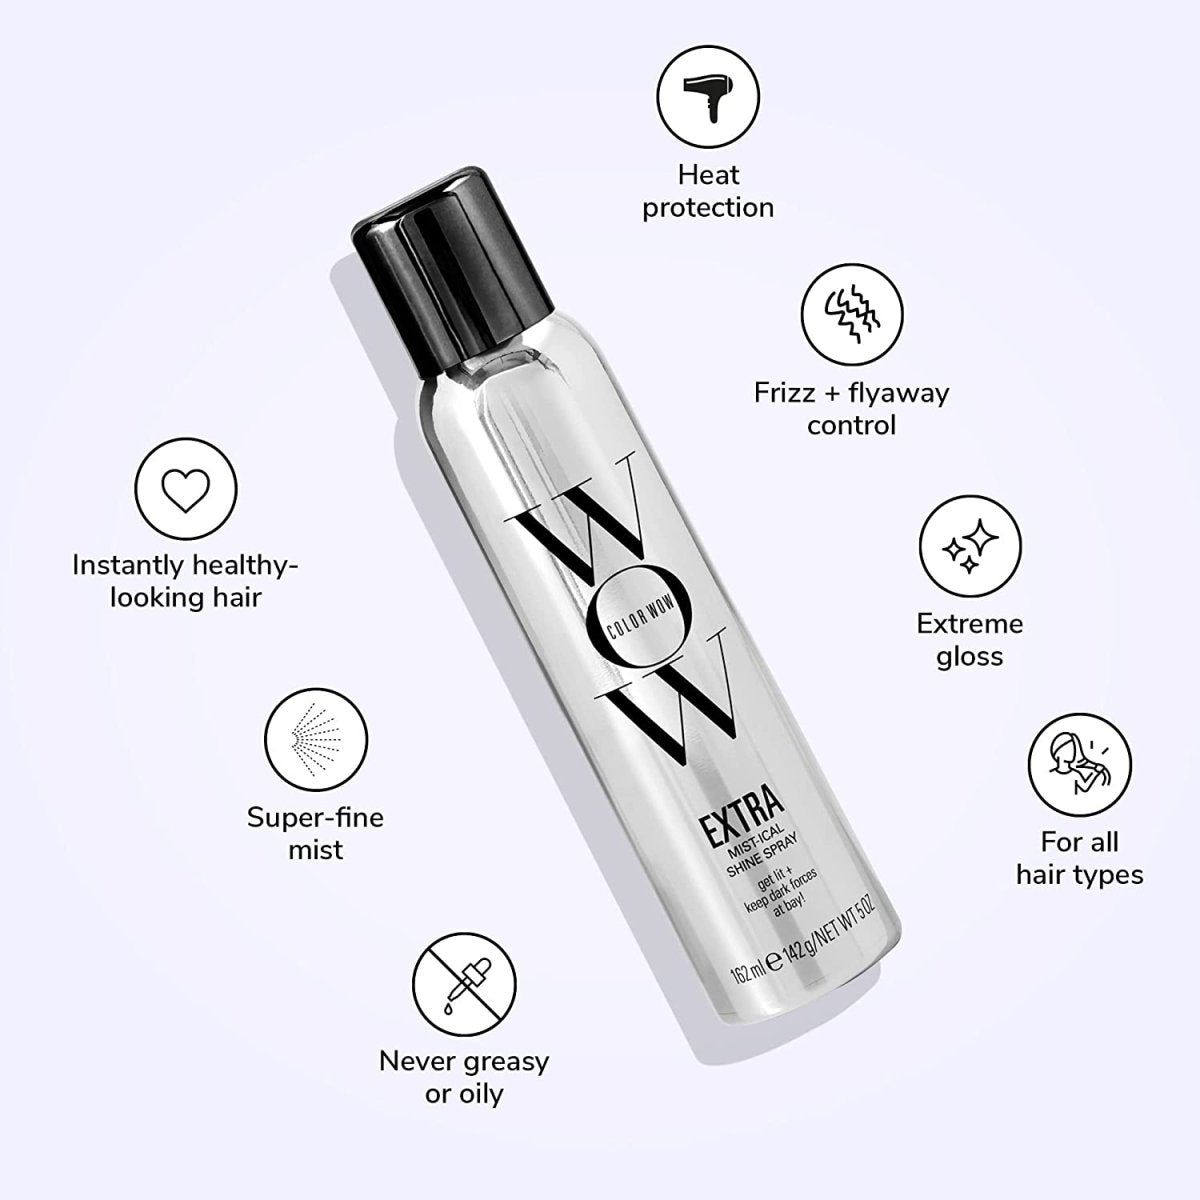 Color Wow | Extra Mist-ical Shine Spray 162ml - DG International Ventures Limited